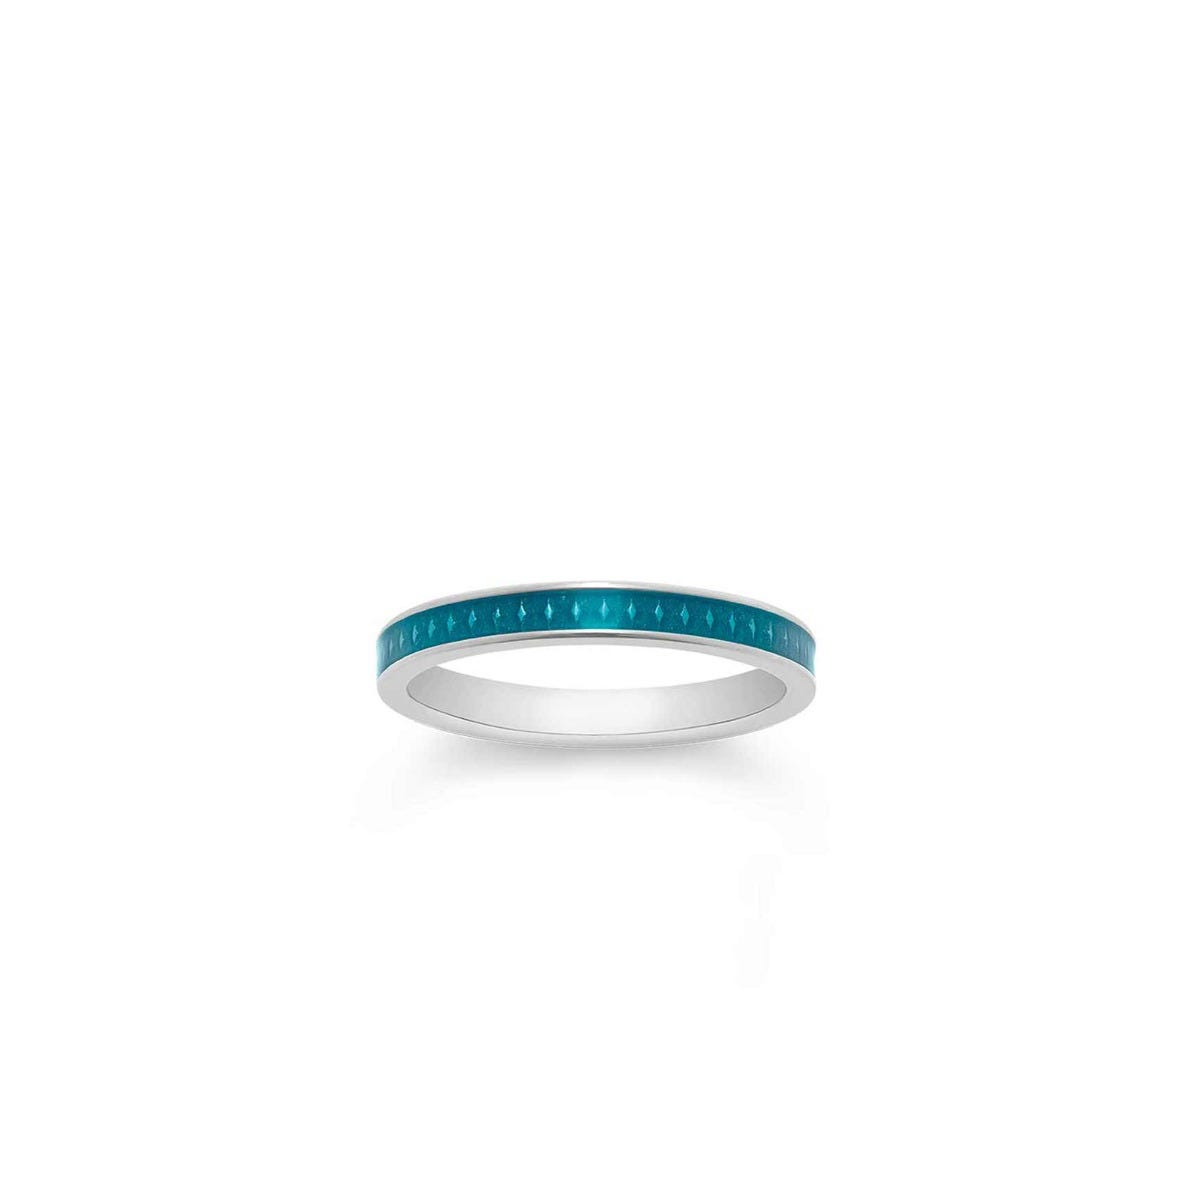 167 Ring with Light Blue Enamel in 18ct White Gold